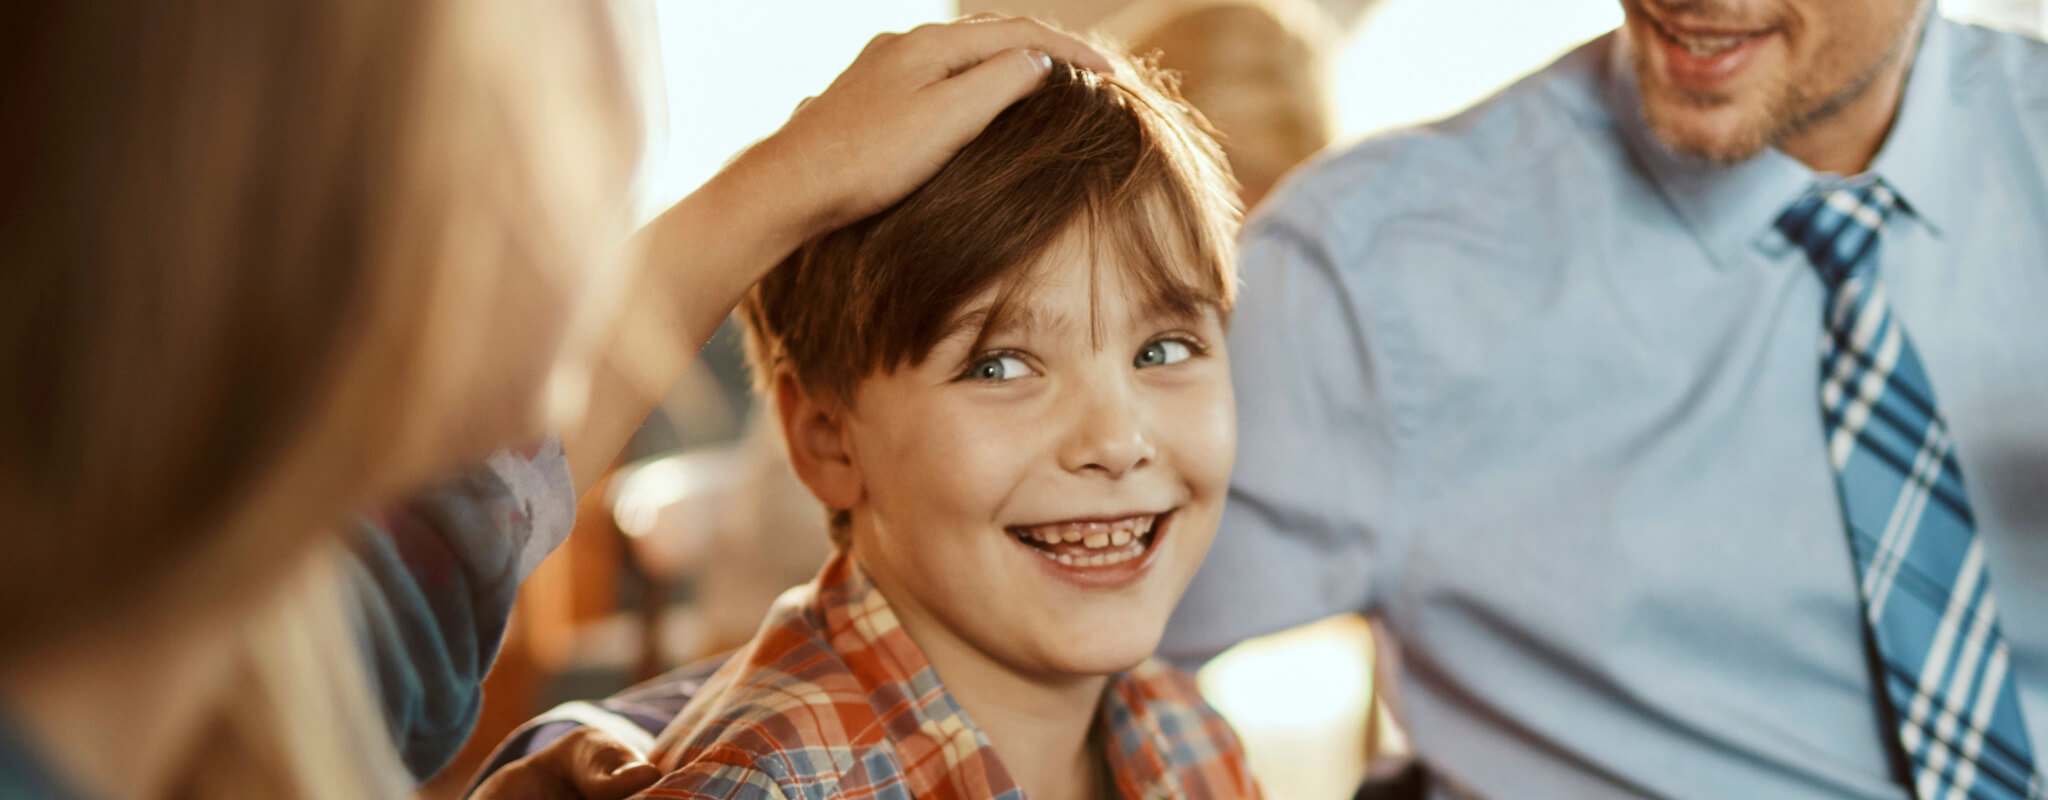 3 Tips: How to choose between braces & clear aligners for your child